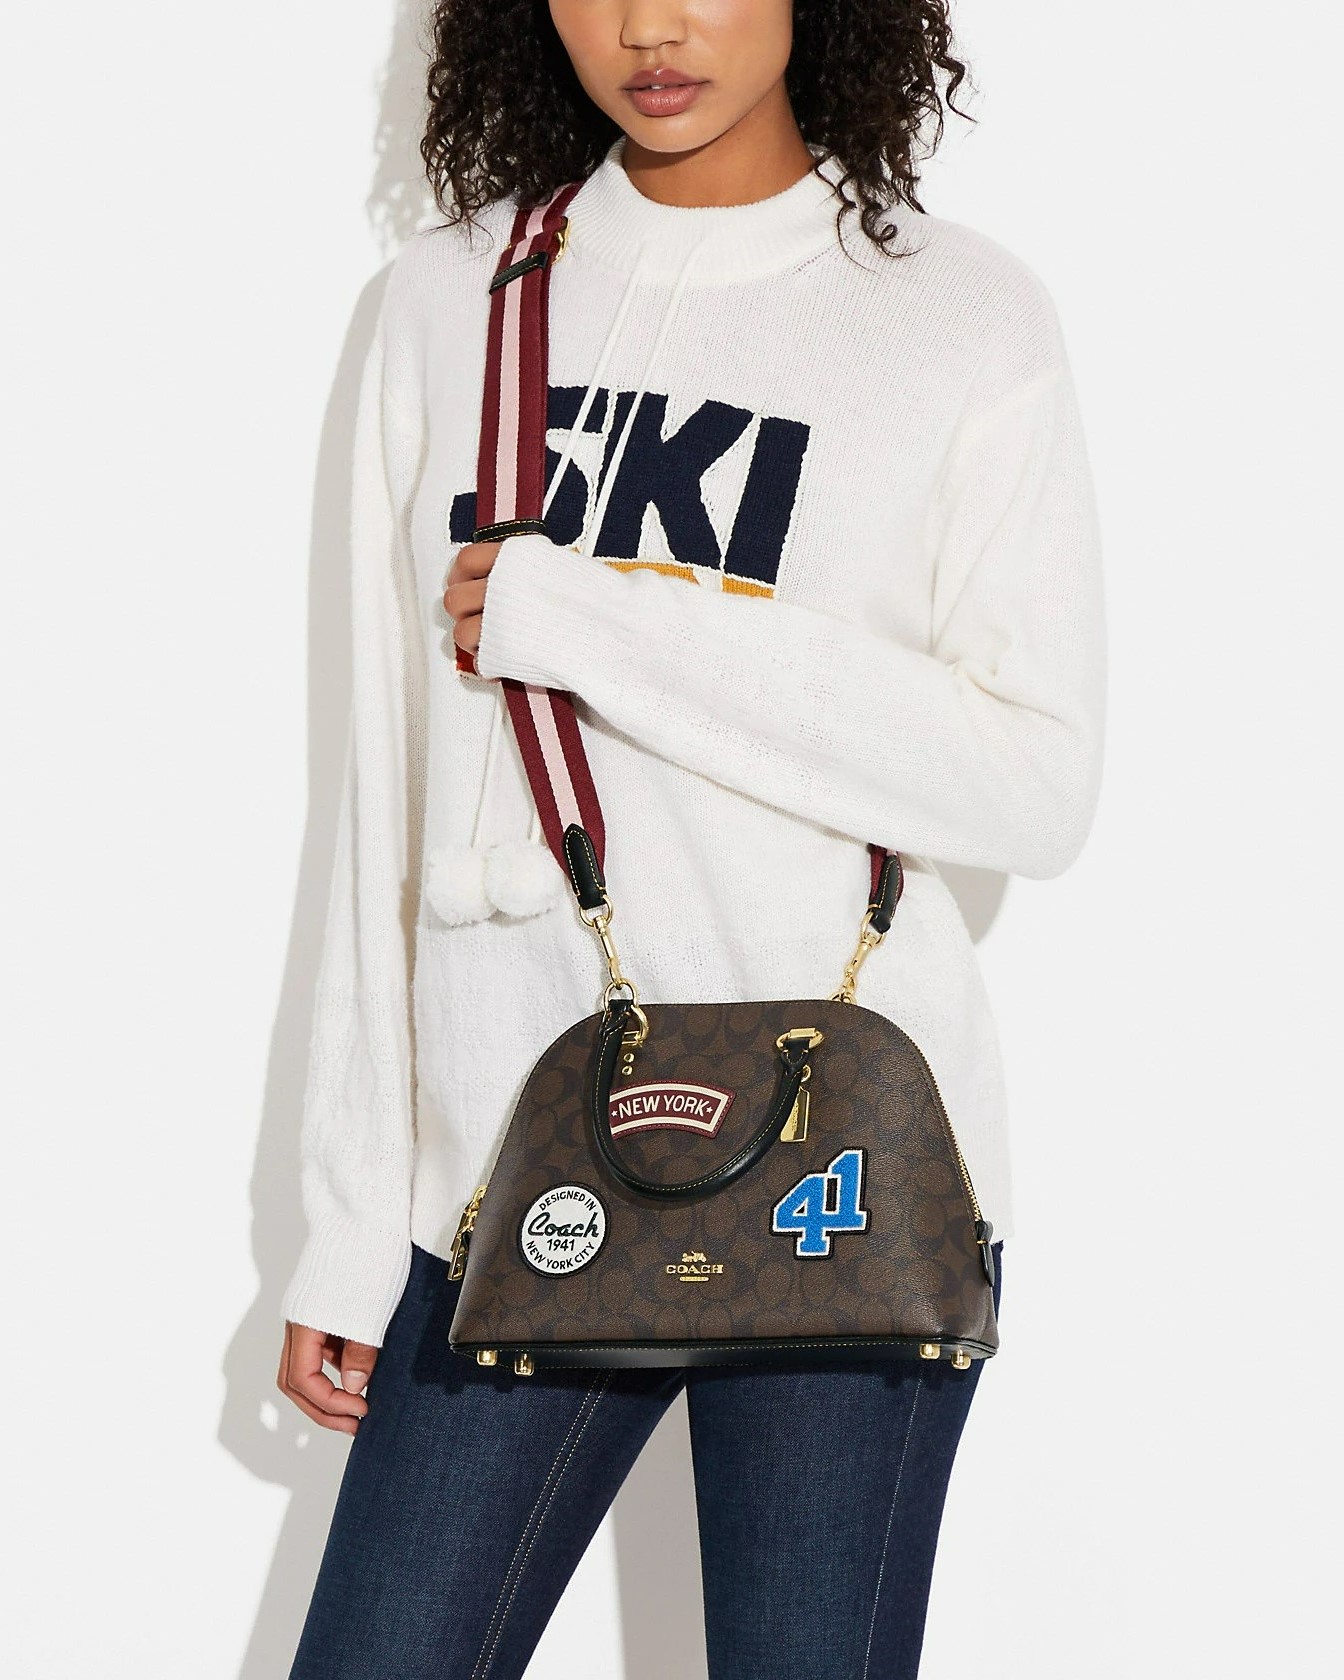 TÚI XÁCH COACH HẾN NỮ KATY SATCHEL IN SIGNATURE CANVAS WITH SKI PATCHES 6